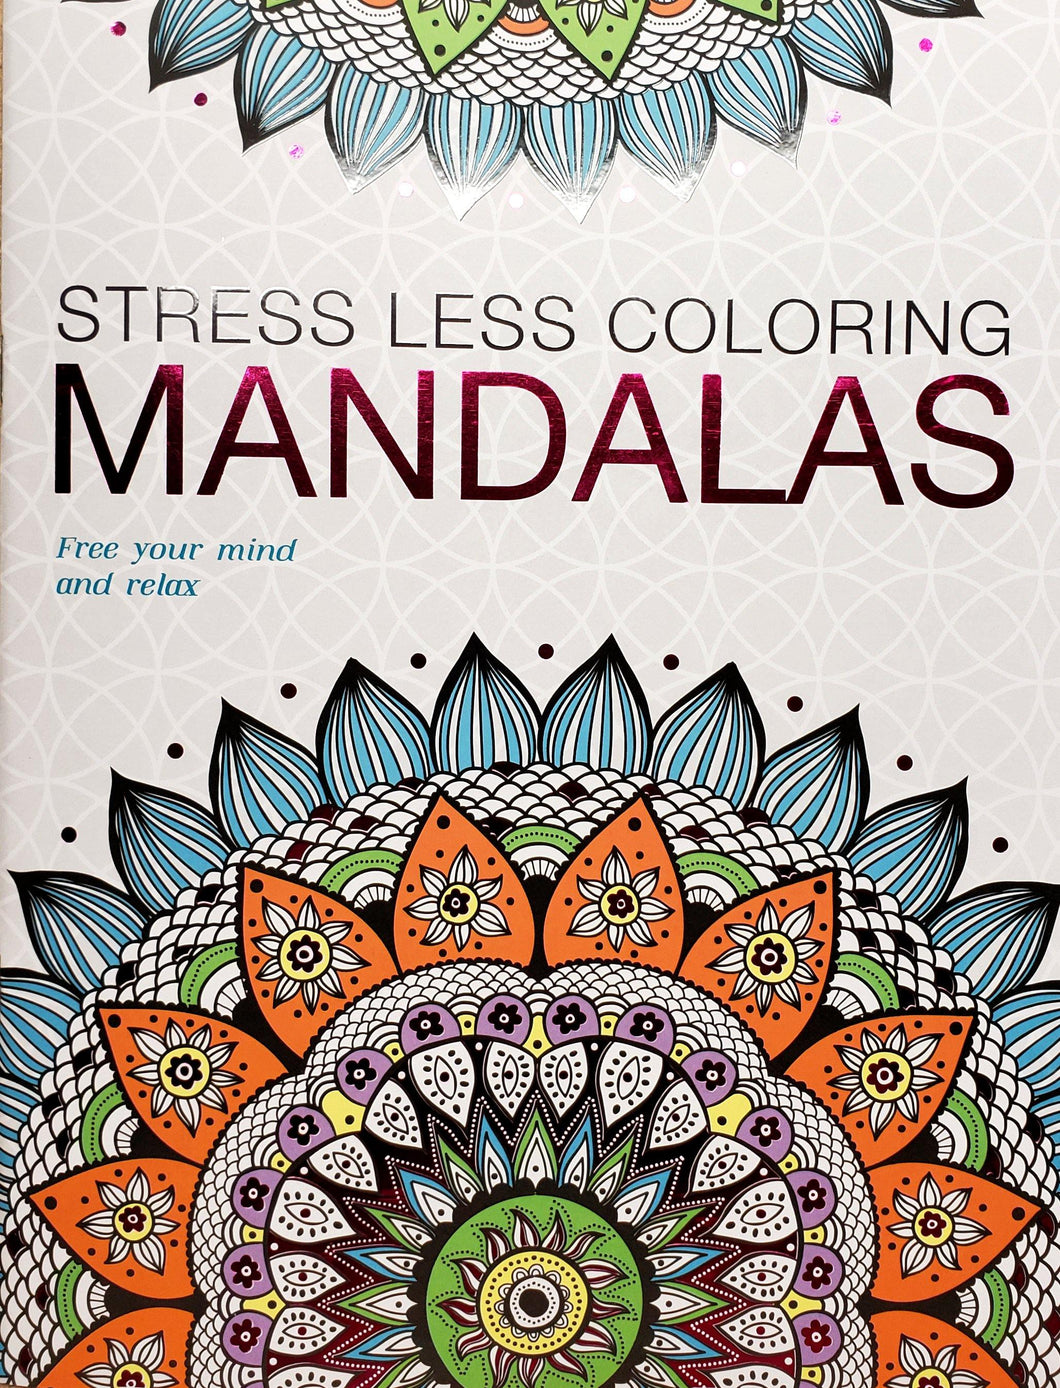 Mandala Pattern Adult Coloring Books for Stress Relief - MirthSlinger